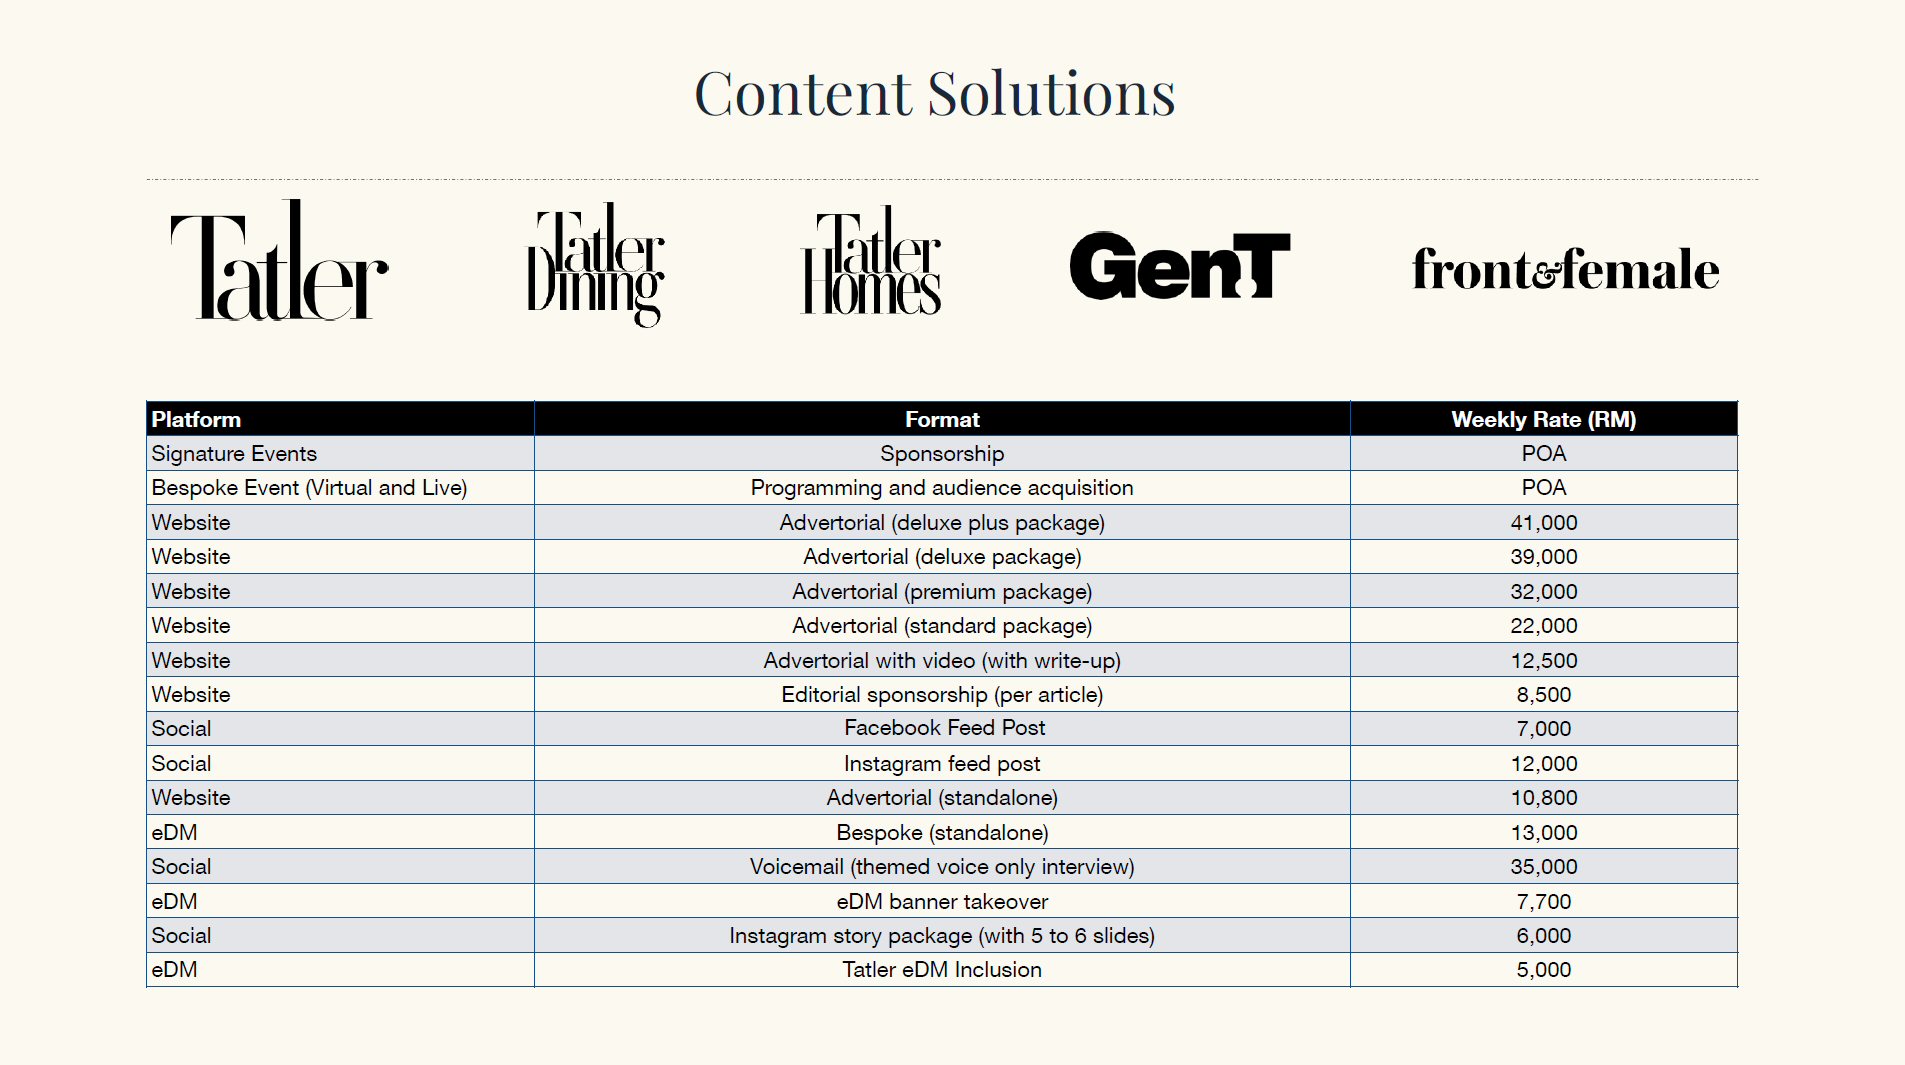 Tatler Malaysia Content Solutions Rate Card